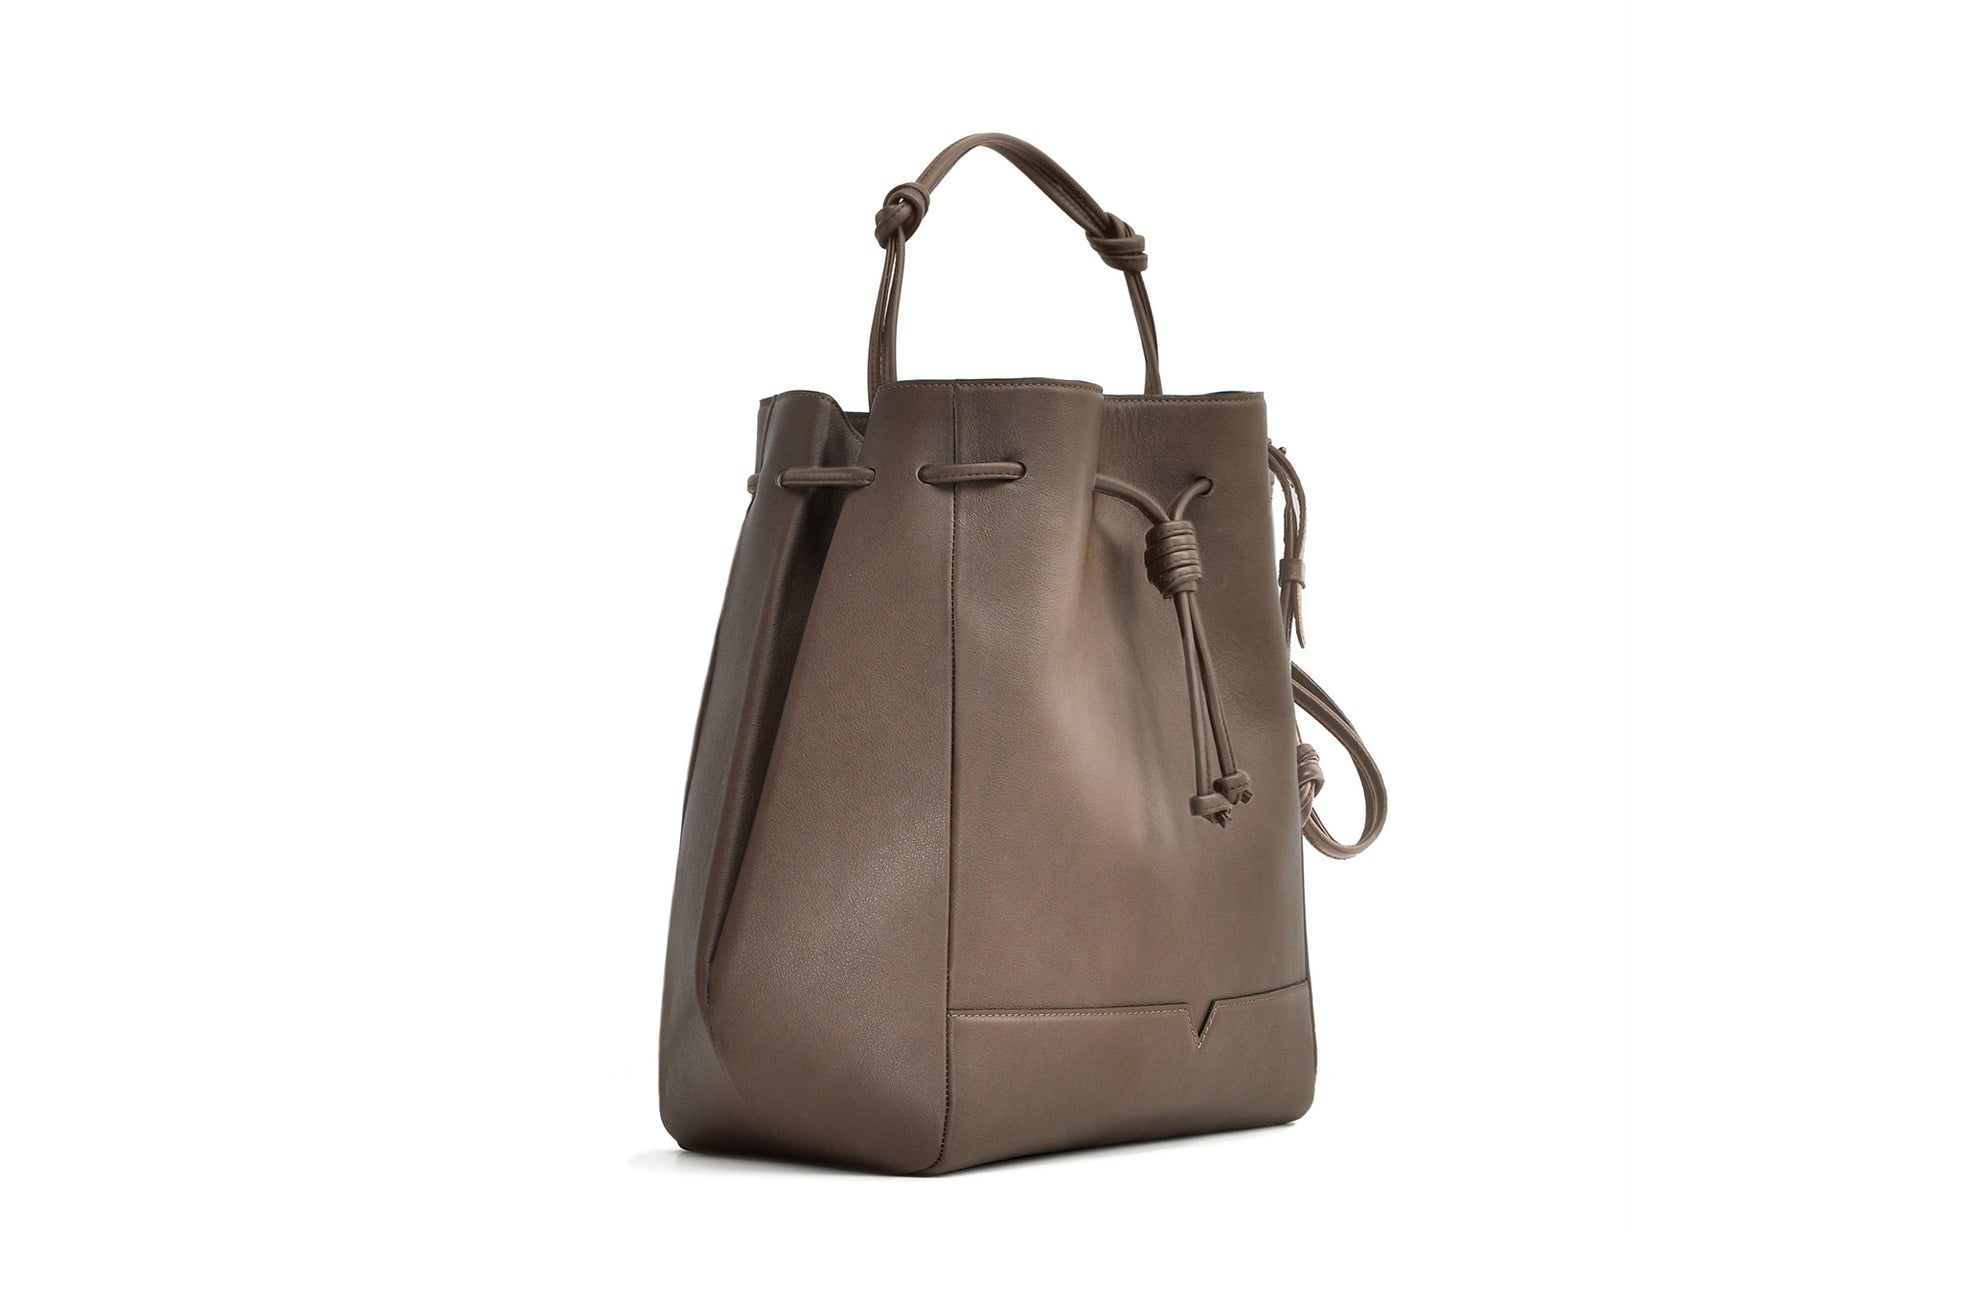 The Large Bucket Backpack - Sample Sale in Technik in Taupe image 4